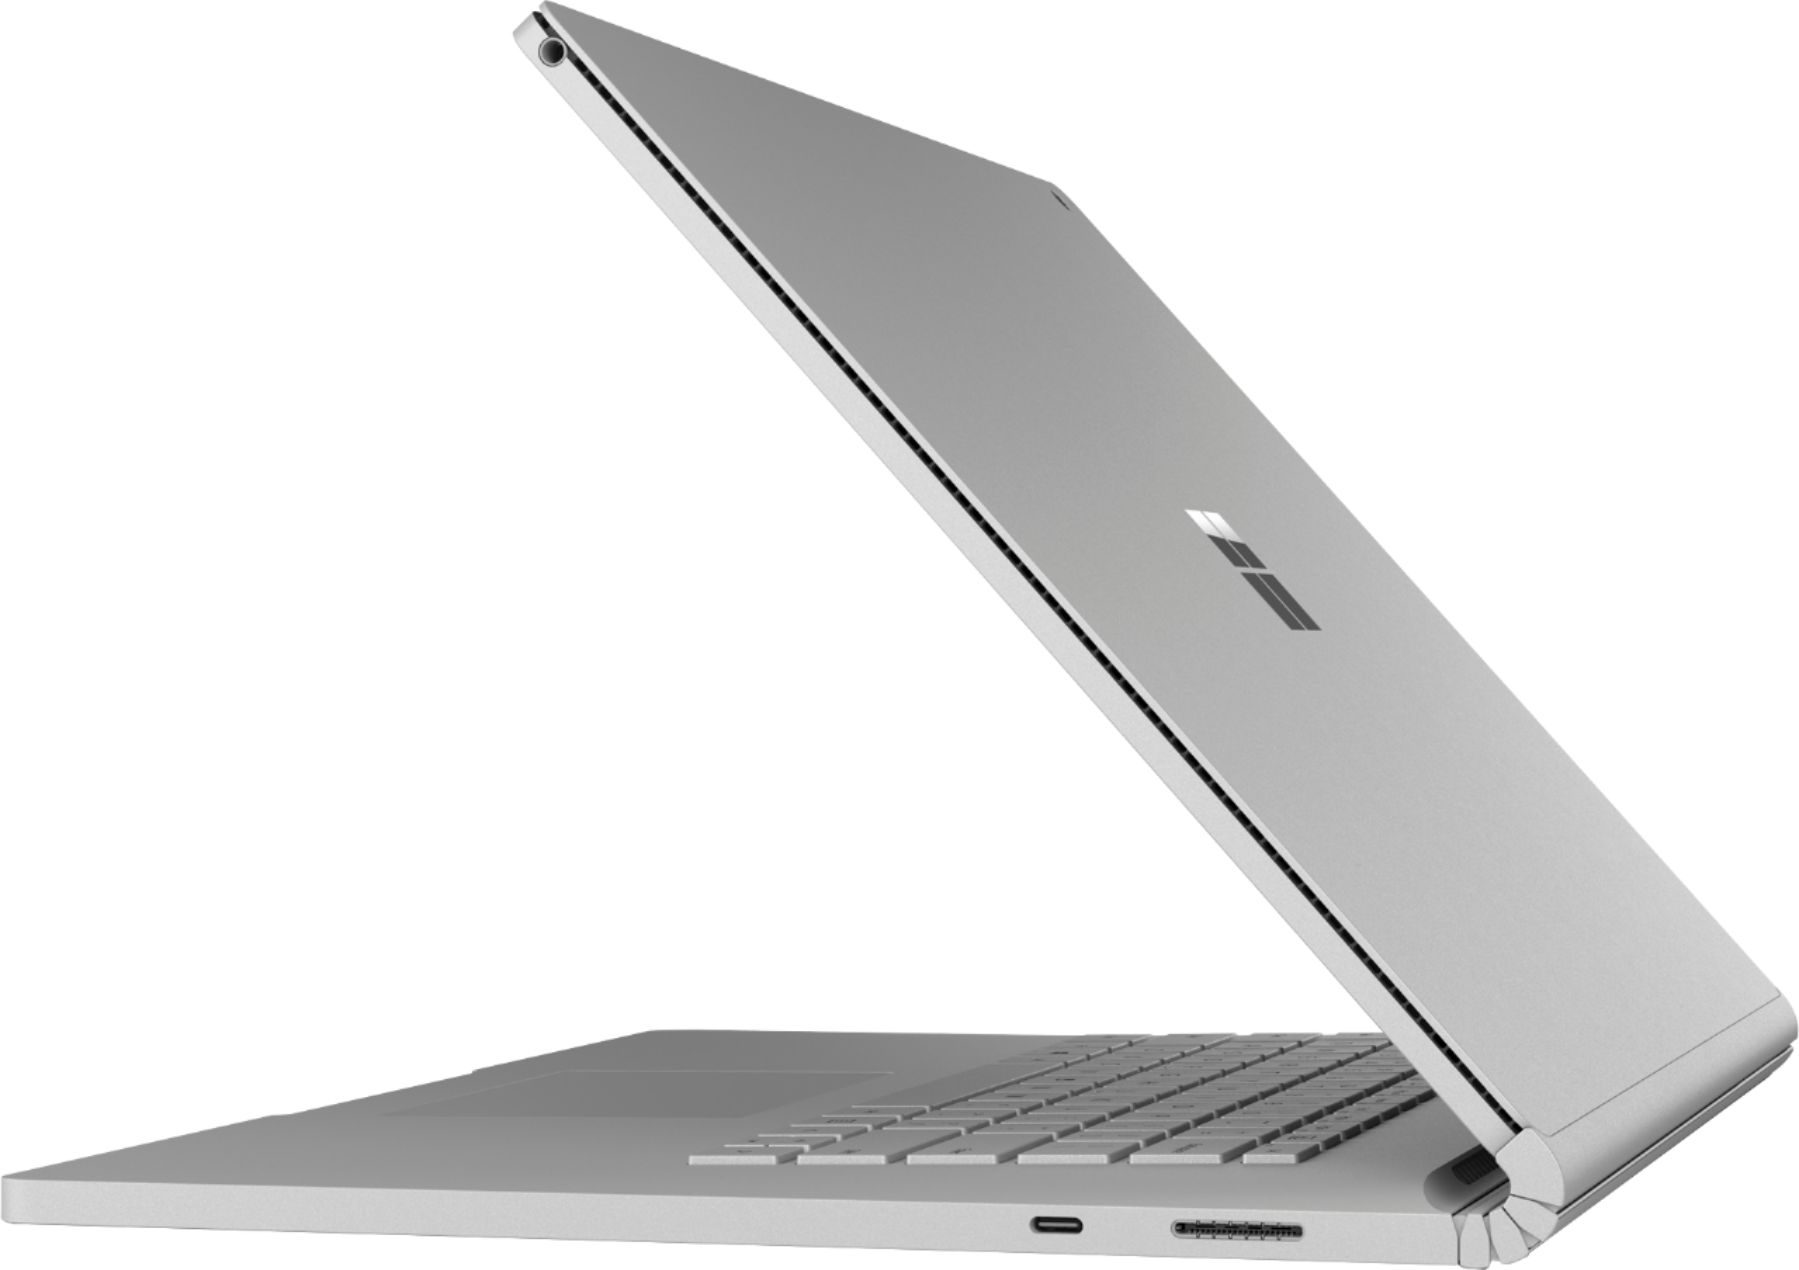 Left View: Microsoft - Geek Squad Certified Refurbished Surface Laptop 3 13.5" Touch-Screen - Intel Core i5 - 8GB Memory - 256GB SSD - Matte Black